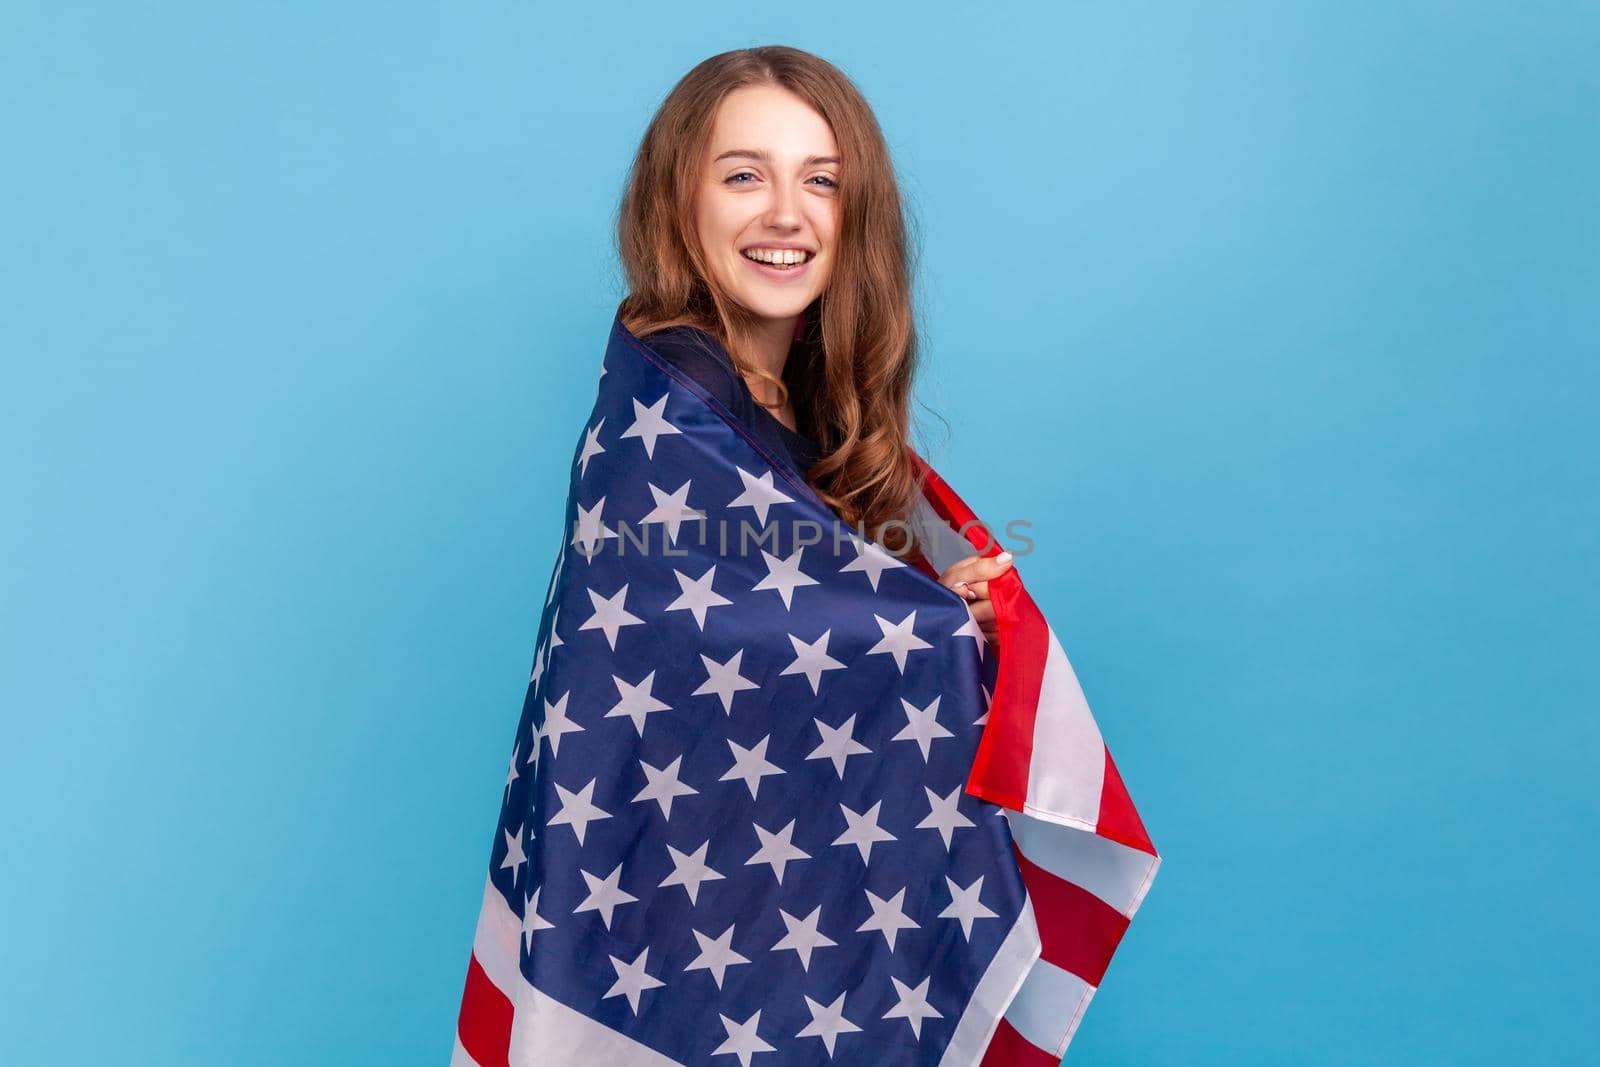 Portrait of satisfied woman wearing striped casual style sweater, standing wrapped in american flag, celebrating National independence day - 4th july. Indoor studio shot isolated on blue background.